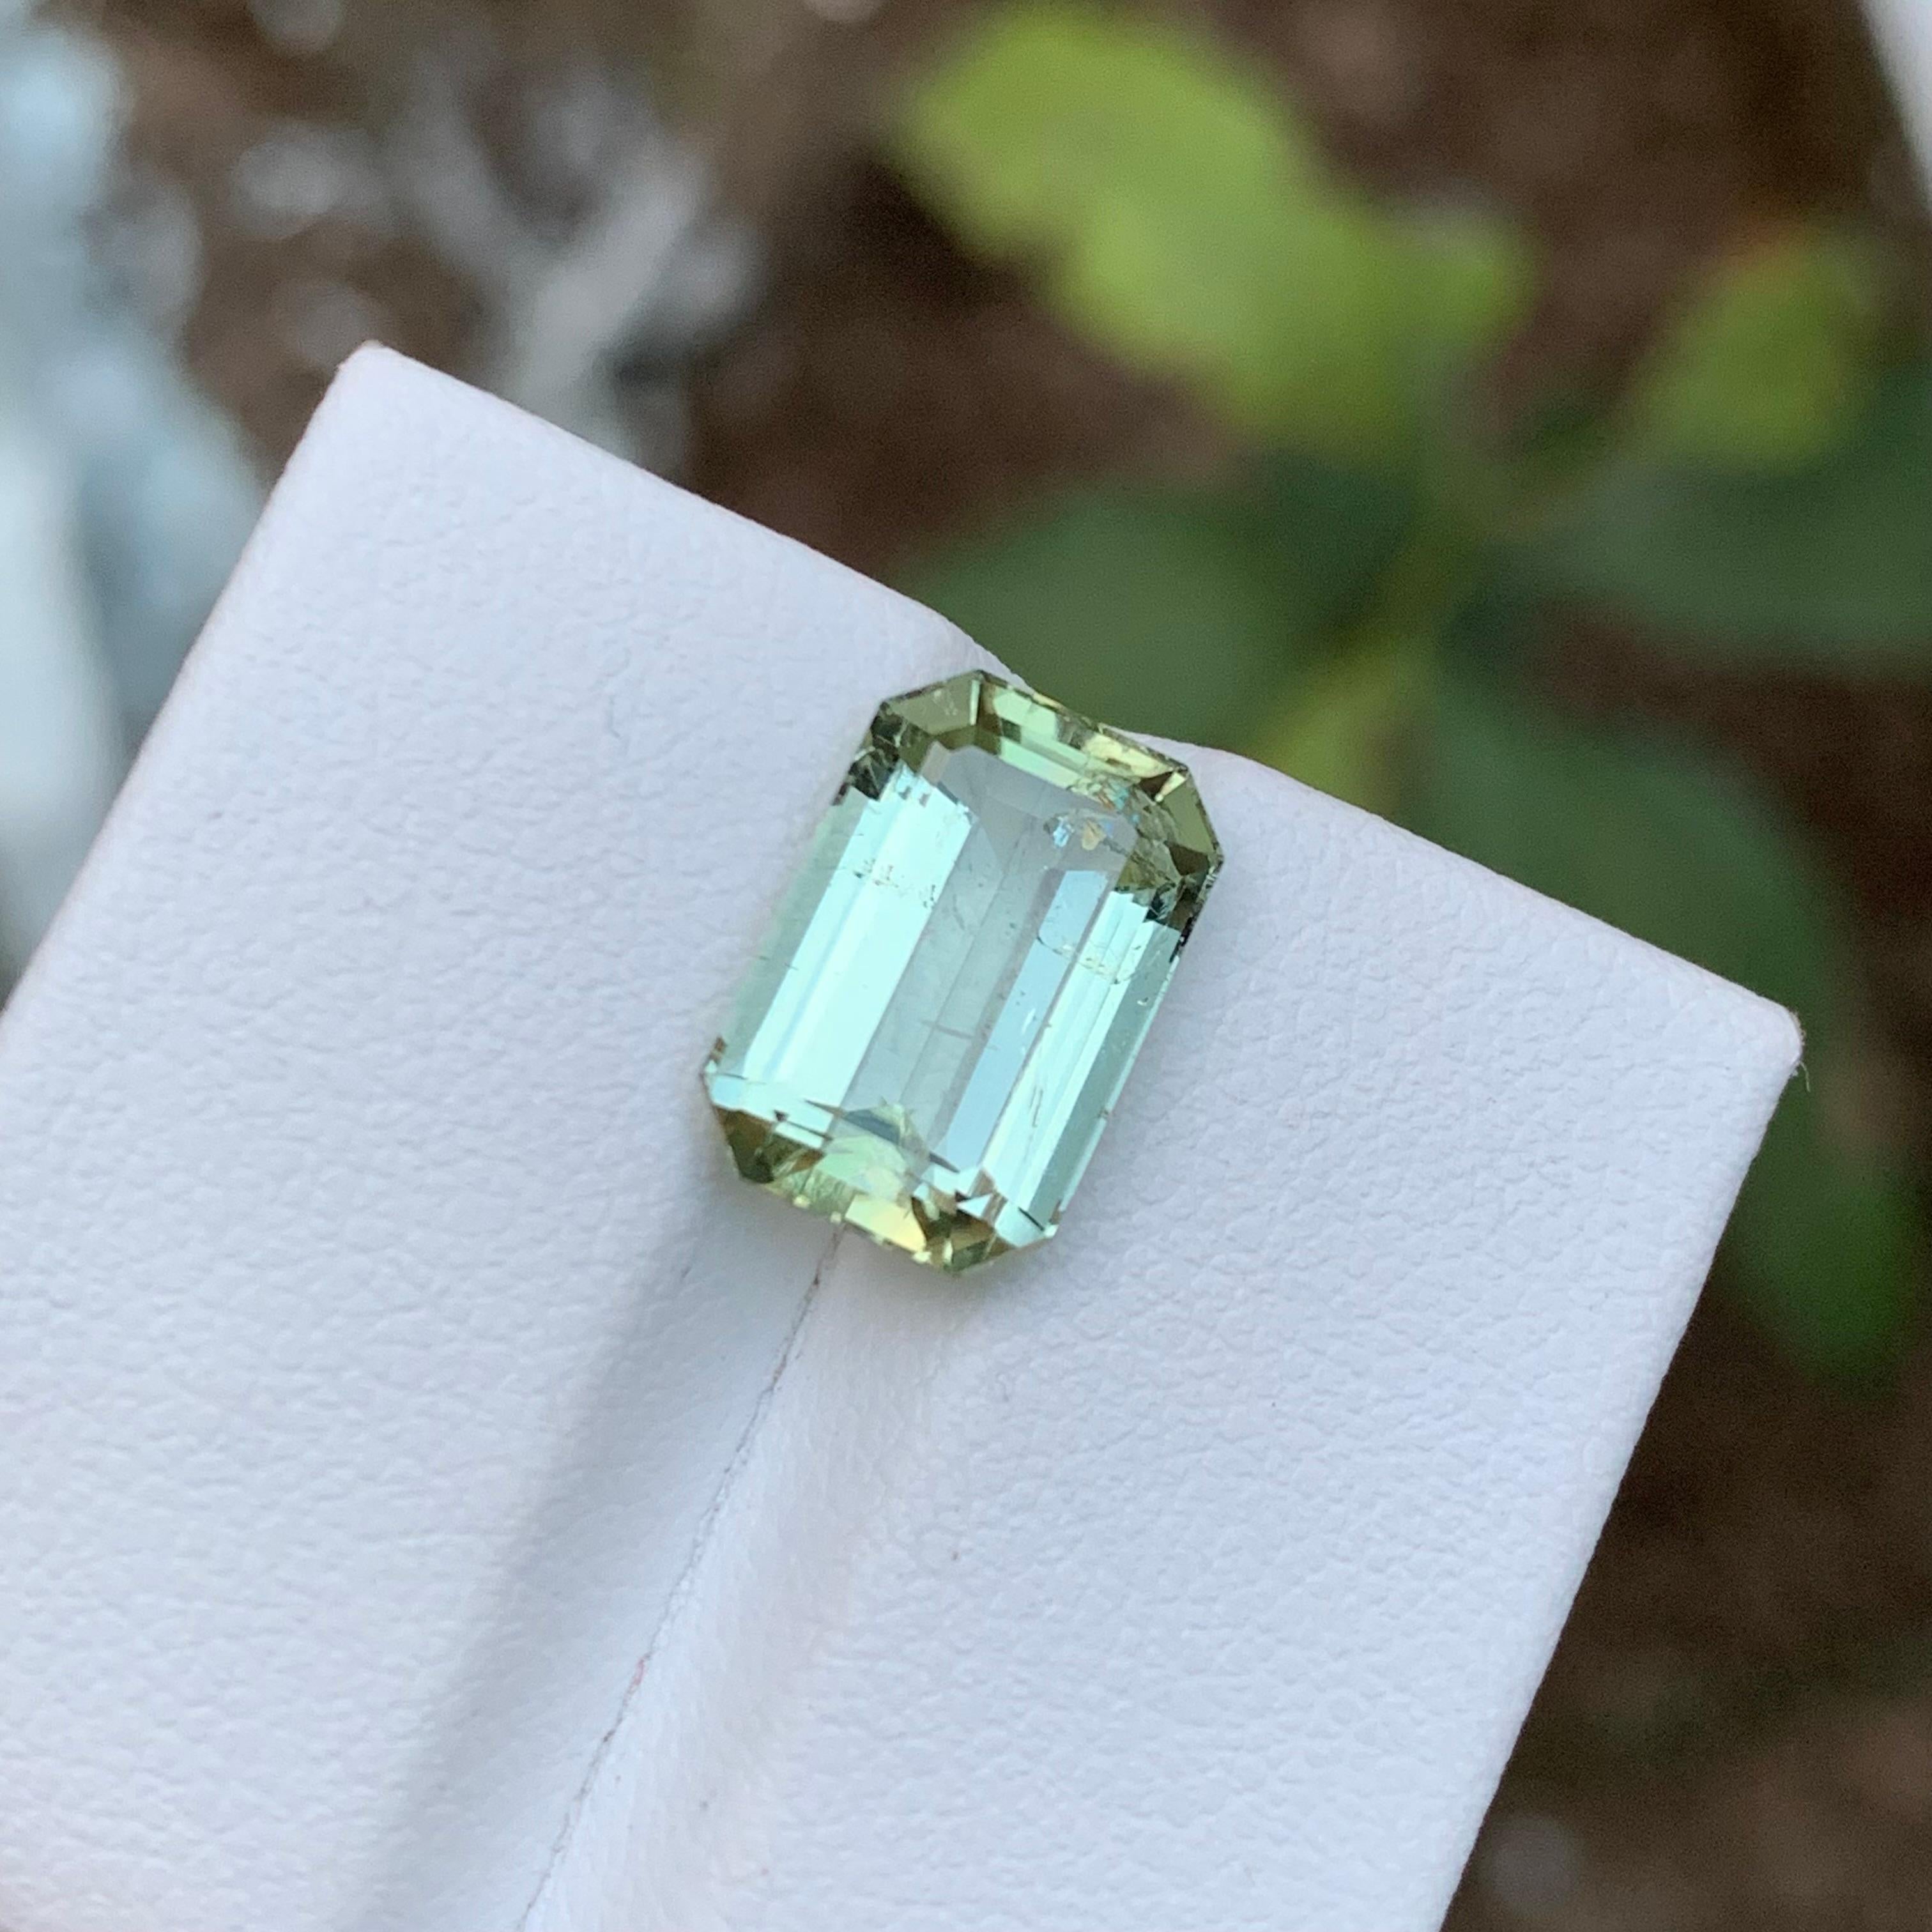 Rare Pastel Green Natural Tourmaline Gemstone, 5.05 Ct Emerald Cut-Ring/Jewelry For Sale 5